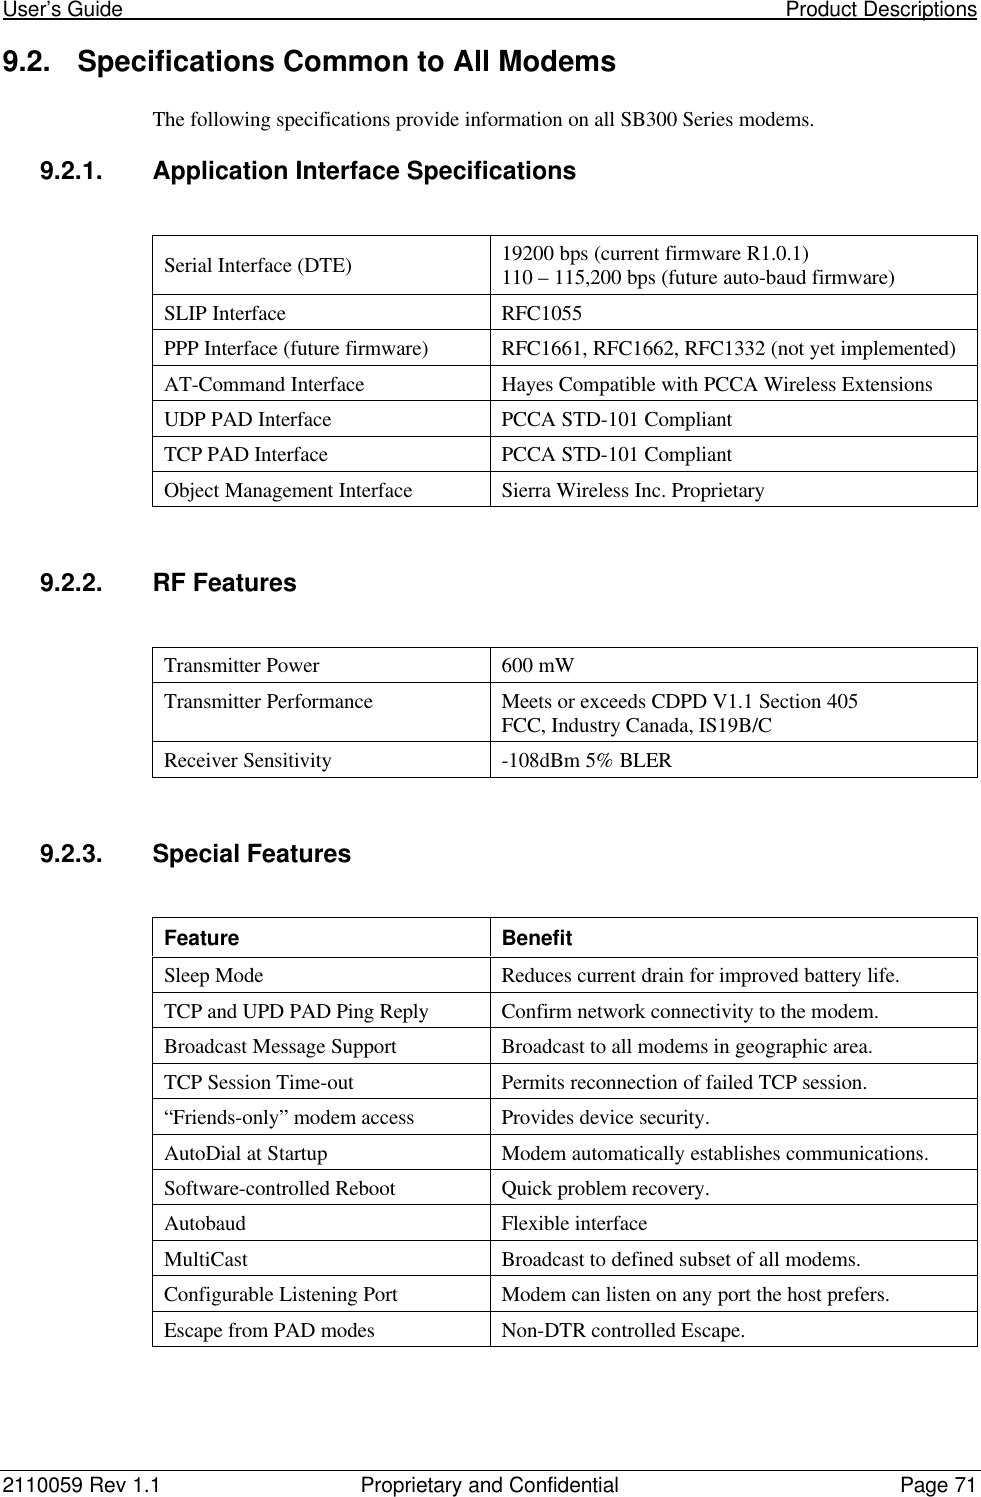 User’s Guide                                                                                                                     Product Descriptions2110059 Rev 1.1 Proprietary and Confidential Page 719.2. Specifications Common to All ModemsThe following specifications provide information on all SB300 Series modems.9.2.1. Application Interface SpecificationsSerial Interface (DTE) 19200 bps (current firmware R1.0.1)110 – 115,200 bps (future auto-baud firmware)SLIP Interface RFC1055PPP Interface (future firmware) RFC1661, RFC1662, RFC1332 (not yet implemented)AT-Command Interface Hayes Compatible with PCCA Wireless ExtensionsUDP PAD Interface PCCA STD-101 CompliantTCP PAD Interface PCCA STD-101 CompliantObject Management Interface Sierra Wireless Inc. Proprietary9.2.2. RF FeaturesTransmitter Power 600 mWTransmitter Performance Meets or exceeds CDPD V1.1 Section 405FCC, Industry Canada, IS19B/CReceiver Sensitivity -108dBm 5% BLER9.2.3. Special FeaturesFeature BenefitSleep Mode Reduces current drain for improved battery life.TCP and UPD PAD Ping Reply Confirm network connectivity to the modem.Broadcast Message Support Broadcast to all modems in geographic area.TCP Session Time-out Permits reconnection of failed TCP session.“Friends-only” modem access Provides device security.AutoDial at Startup Modem automatically establishes communications.Software-controlled Reboot Quick problem recovery.Autobaud Flexible interfaceMultiCast Broadcast to defined subset of all modems.Configurable Listening Port Modem can listen on any port the host prefers.Escape from PAD modes Non-DTR controlled Escape.